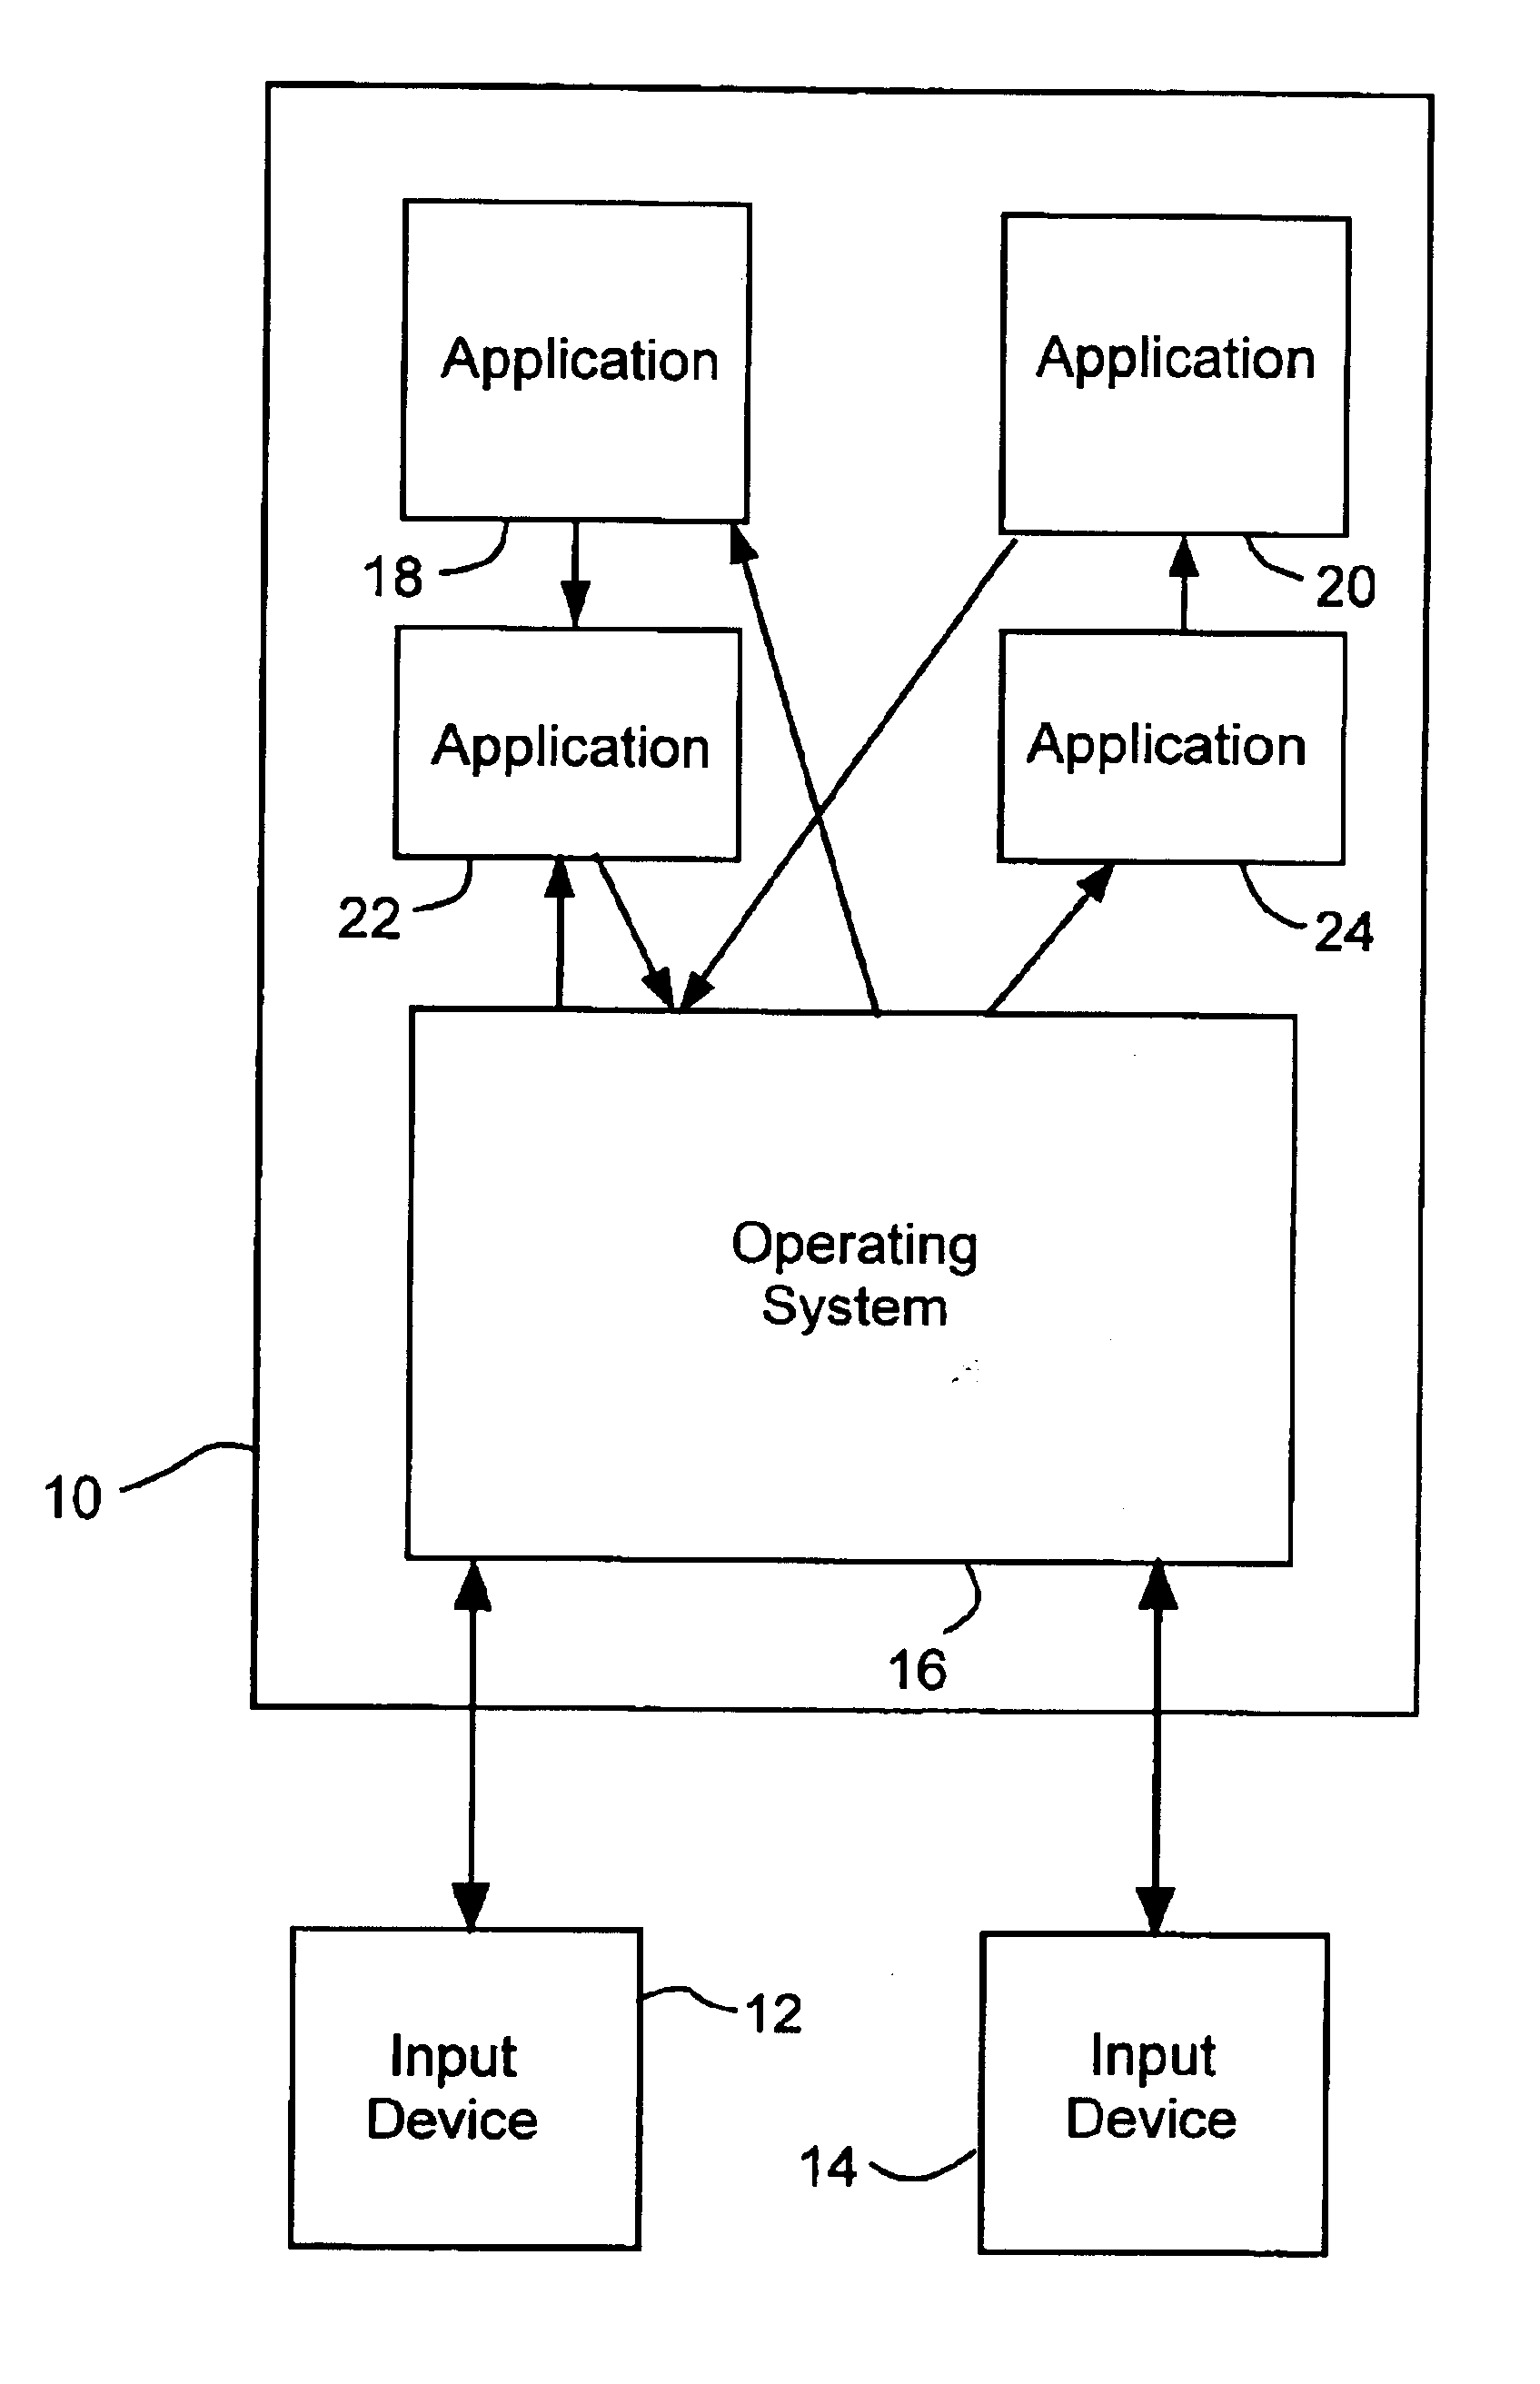 Configurable operating system for control of a mobile I/O device